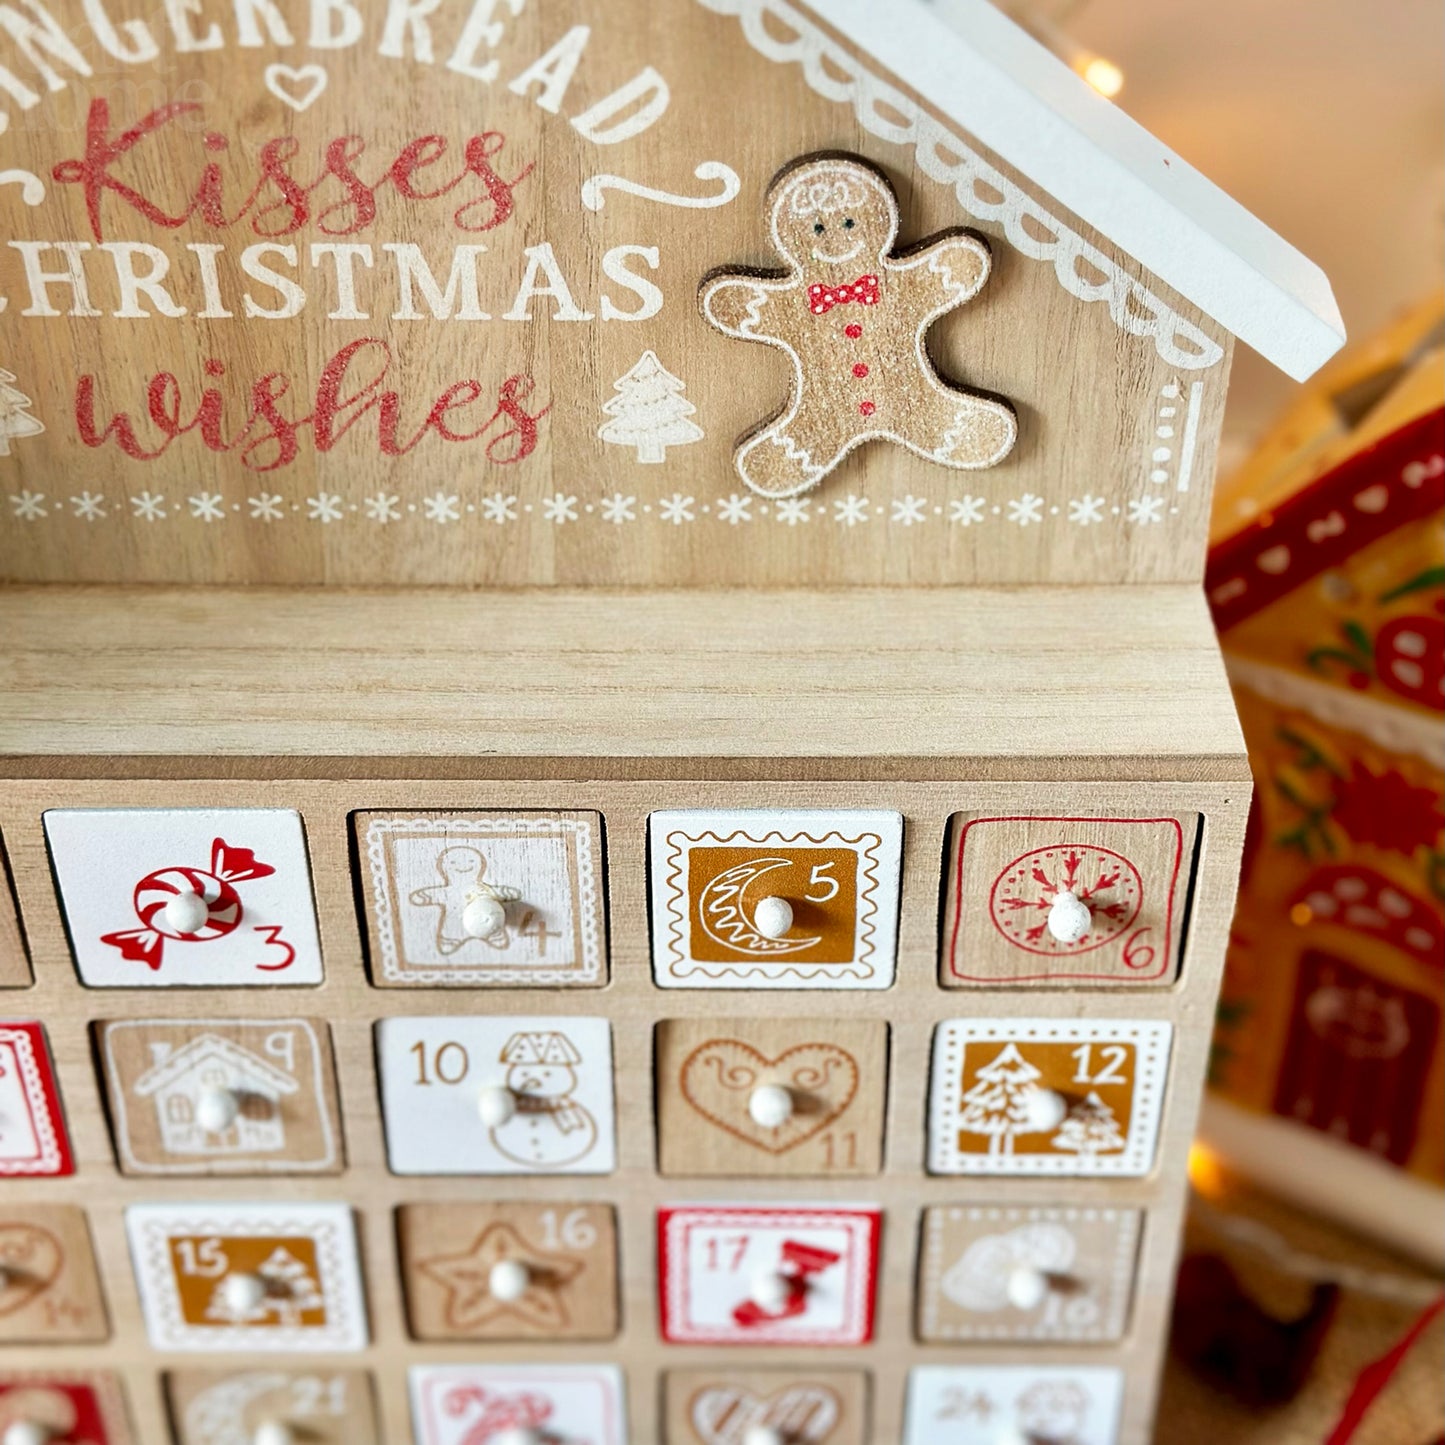 Gingerbread Christmas Wishes Advent Calendar